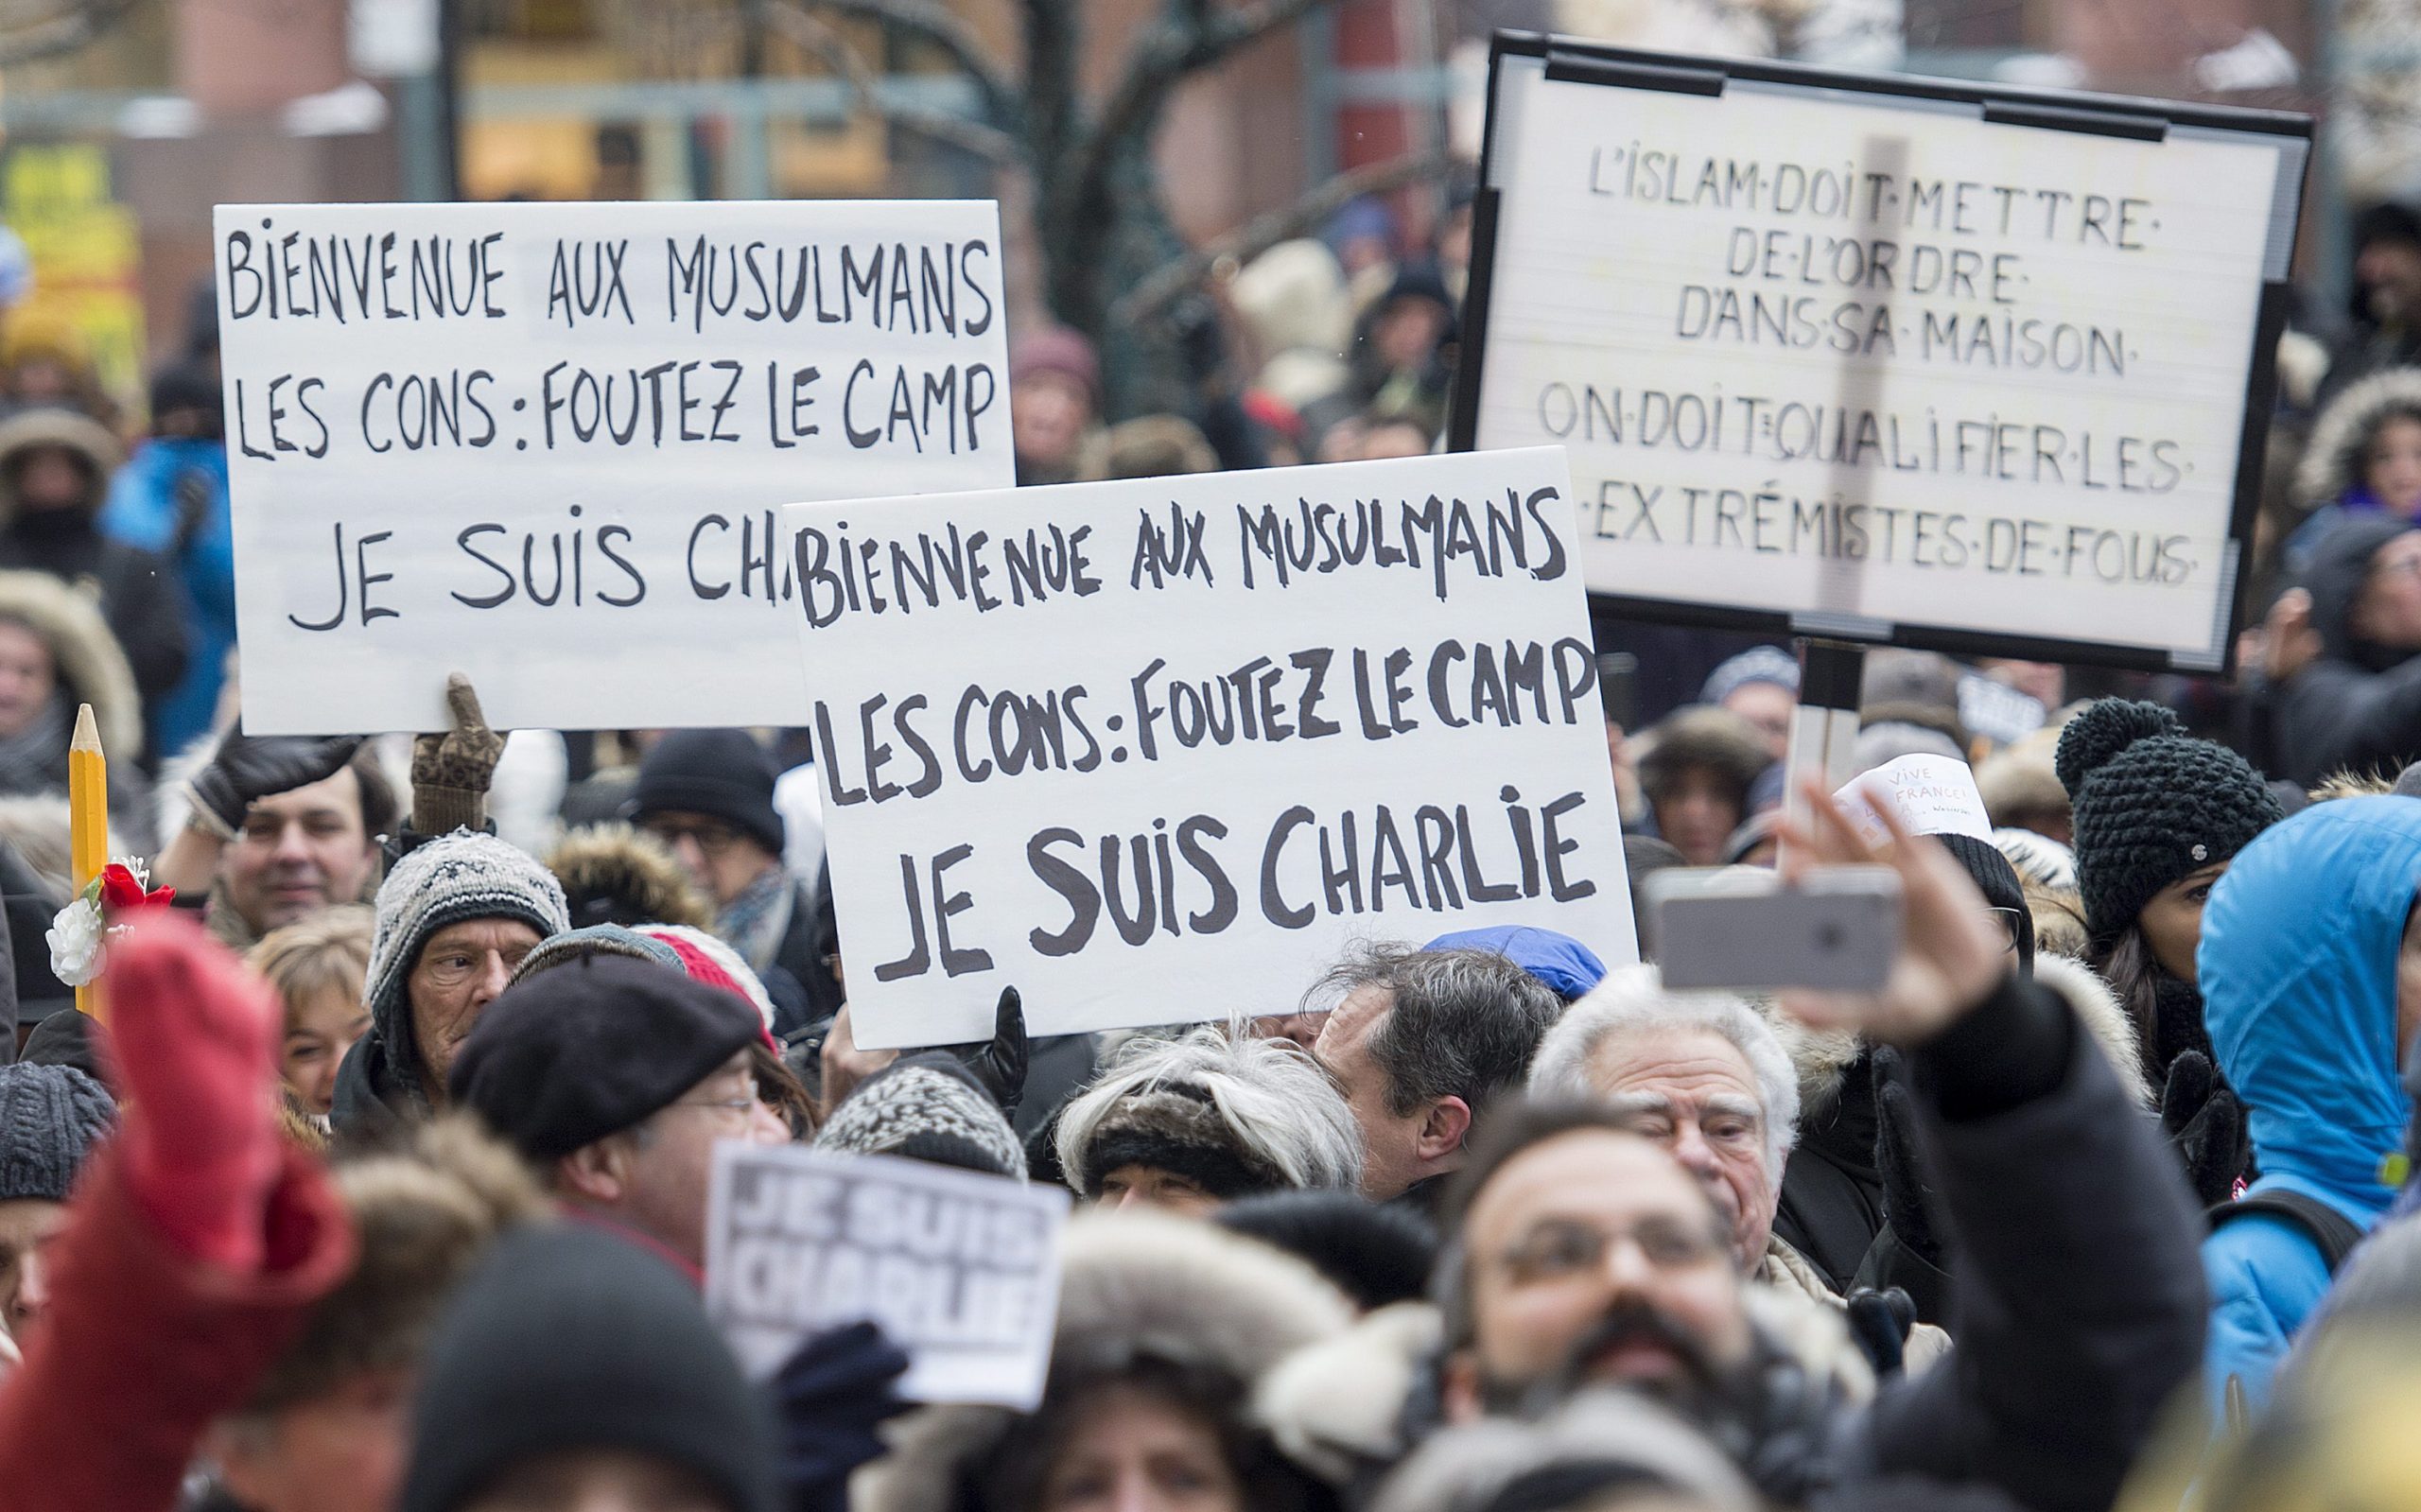 People hold up signs during a solidarity rally in support of all the victims who lost their lives during recent terrorist attacks in France, Sunday, Jan. 11, 2015, in Montreal. (AP Photo/The Canadian Press, Graham Hughes)